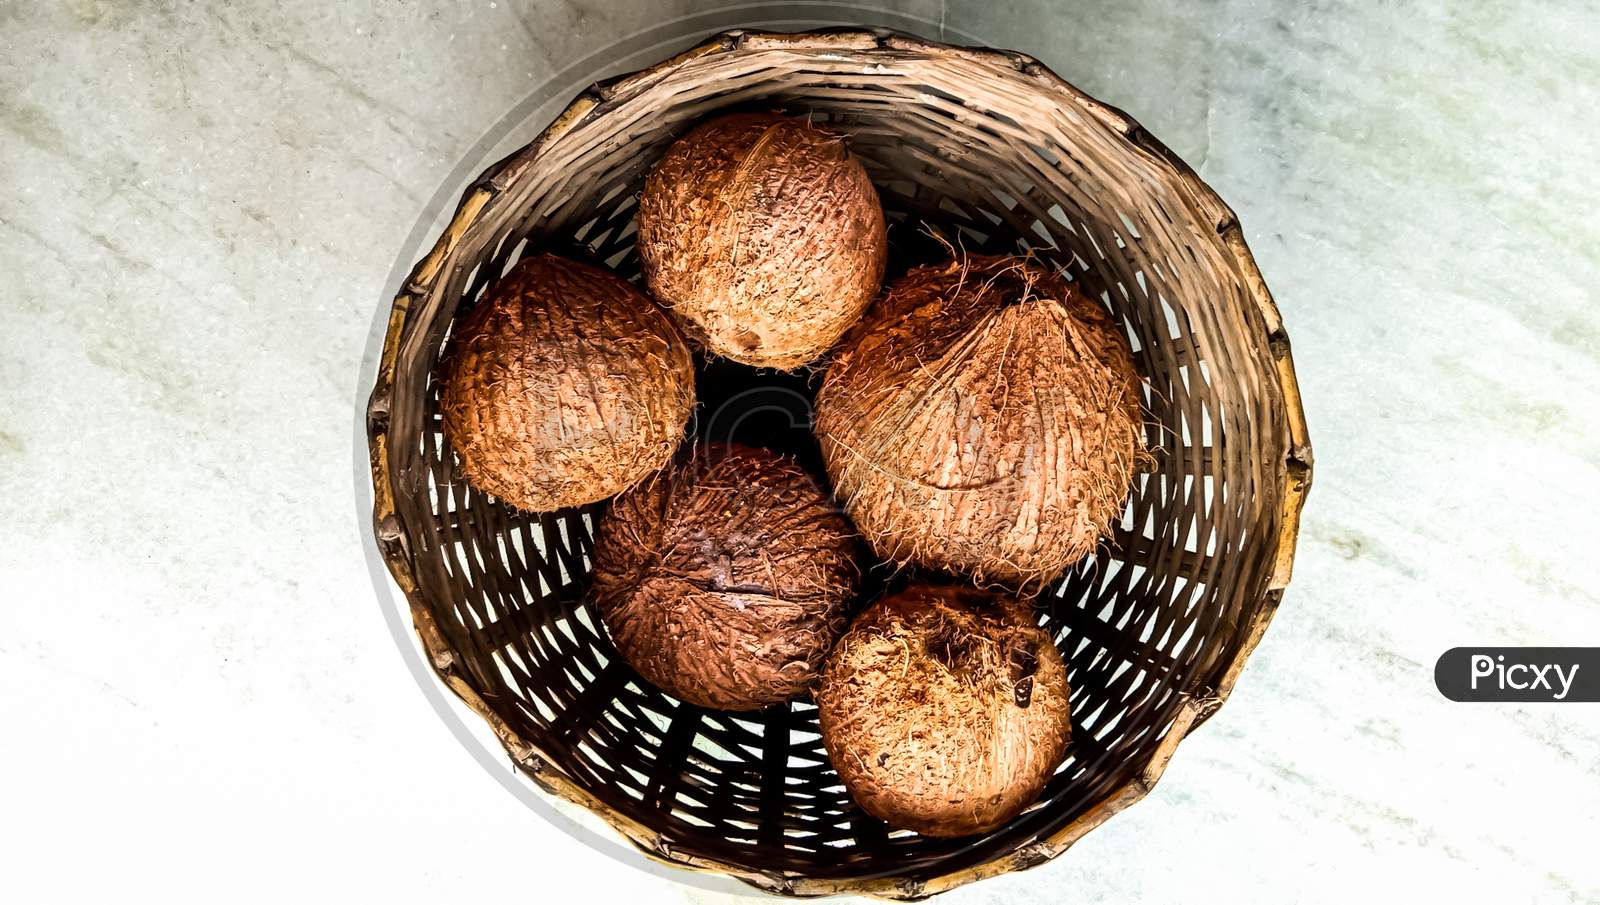 Indian fresh coconut in the basket for sell.